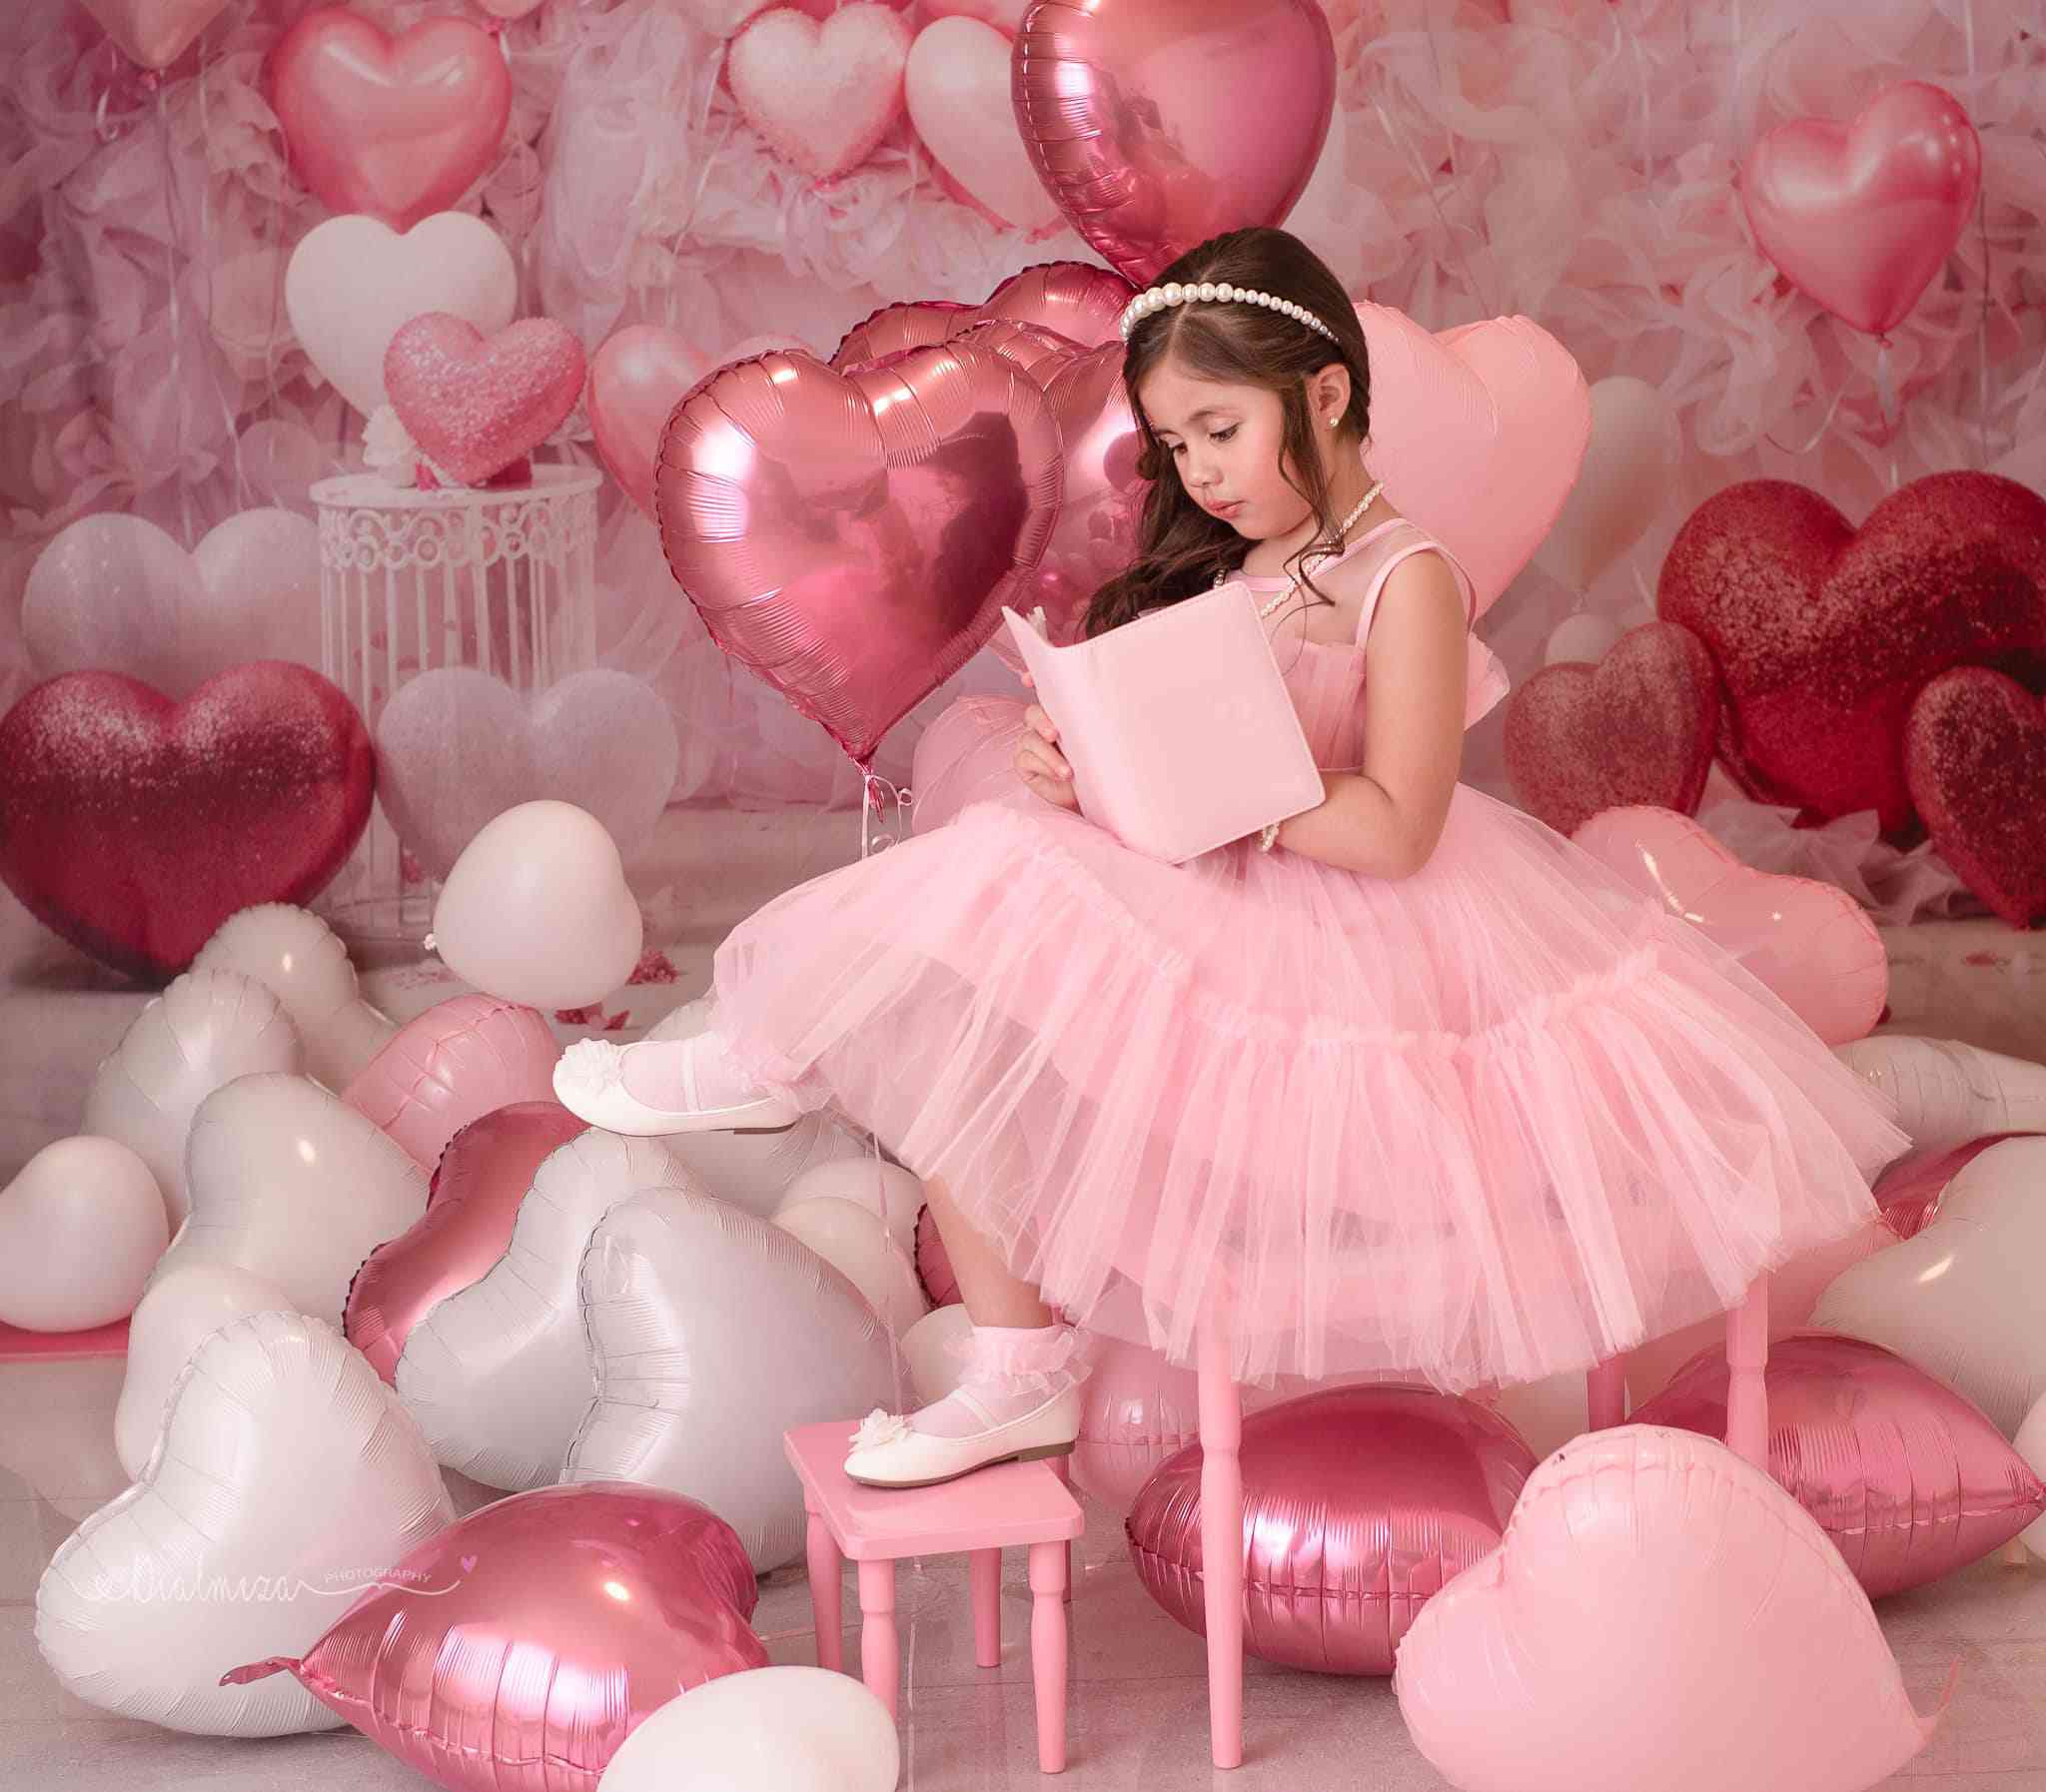 Kate Valentine's Day Backdrop Pink Love Heart Balloon Romantic Room Designed by Emetselch